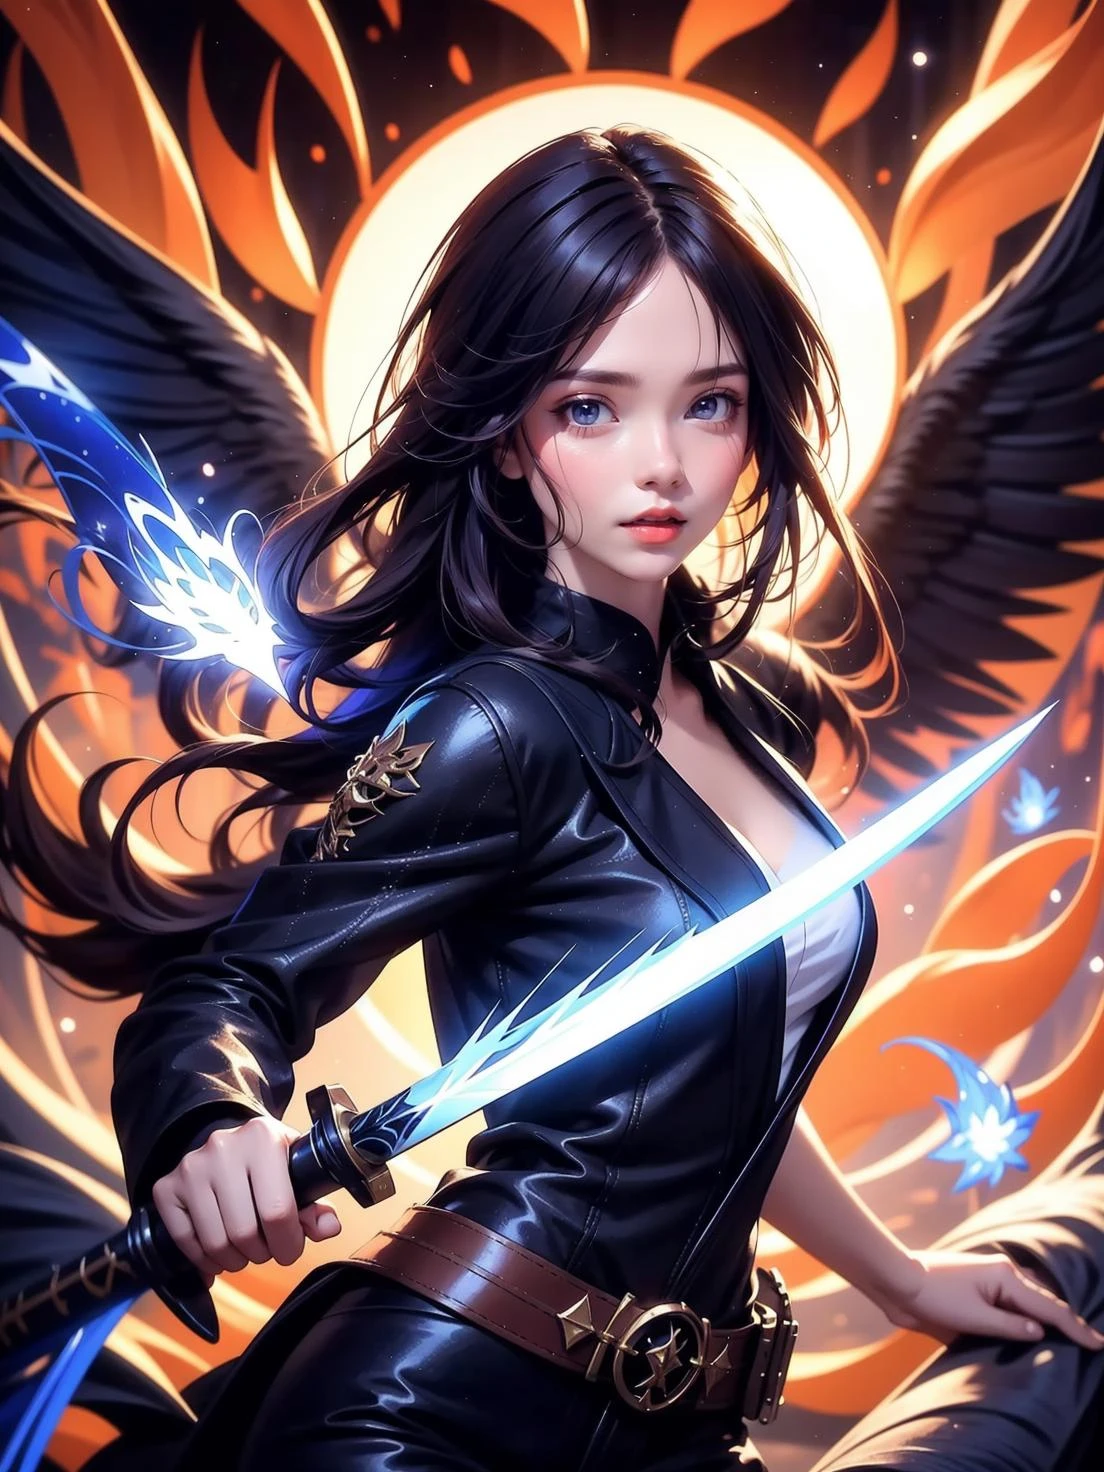 ((masterpiece, best quality)),a girl holding a sword, in the style of dark azure and light azure, mixes realistic and fantastical elements, vibrant manga, uhd image, glassy translucence, vibrant illustrations